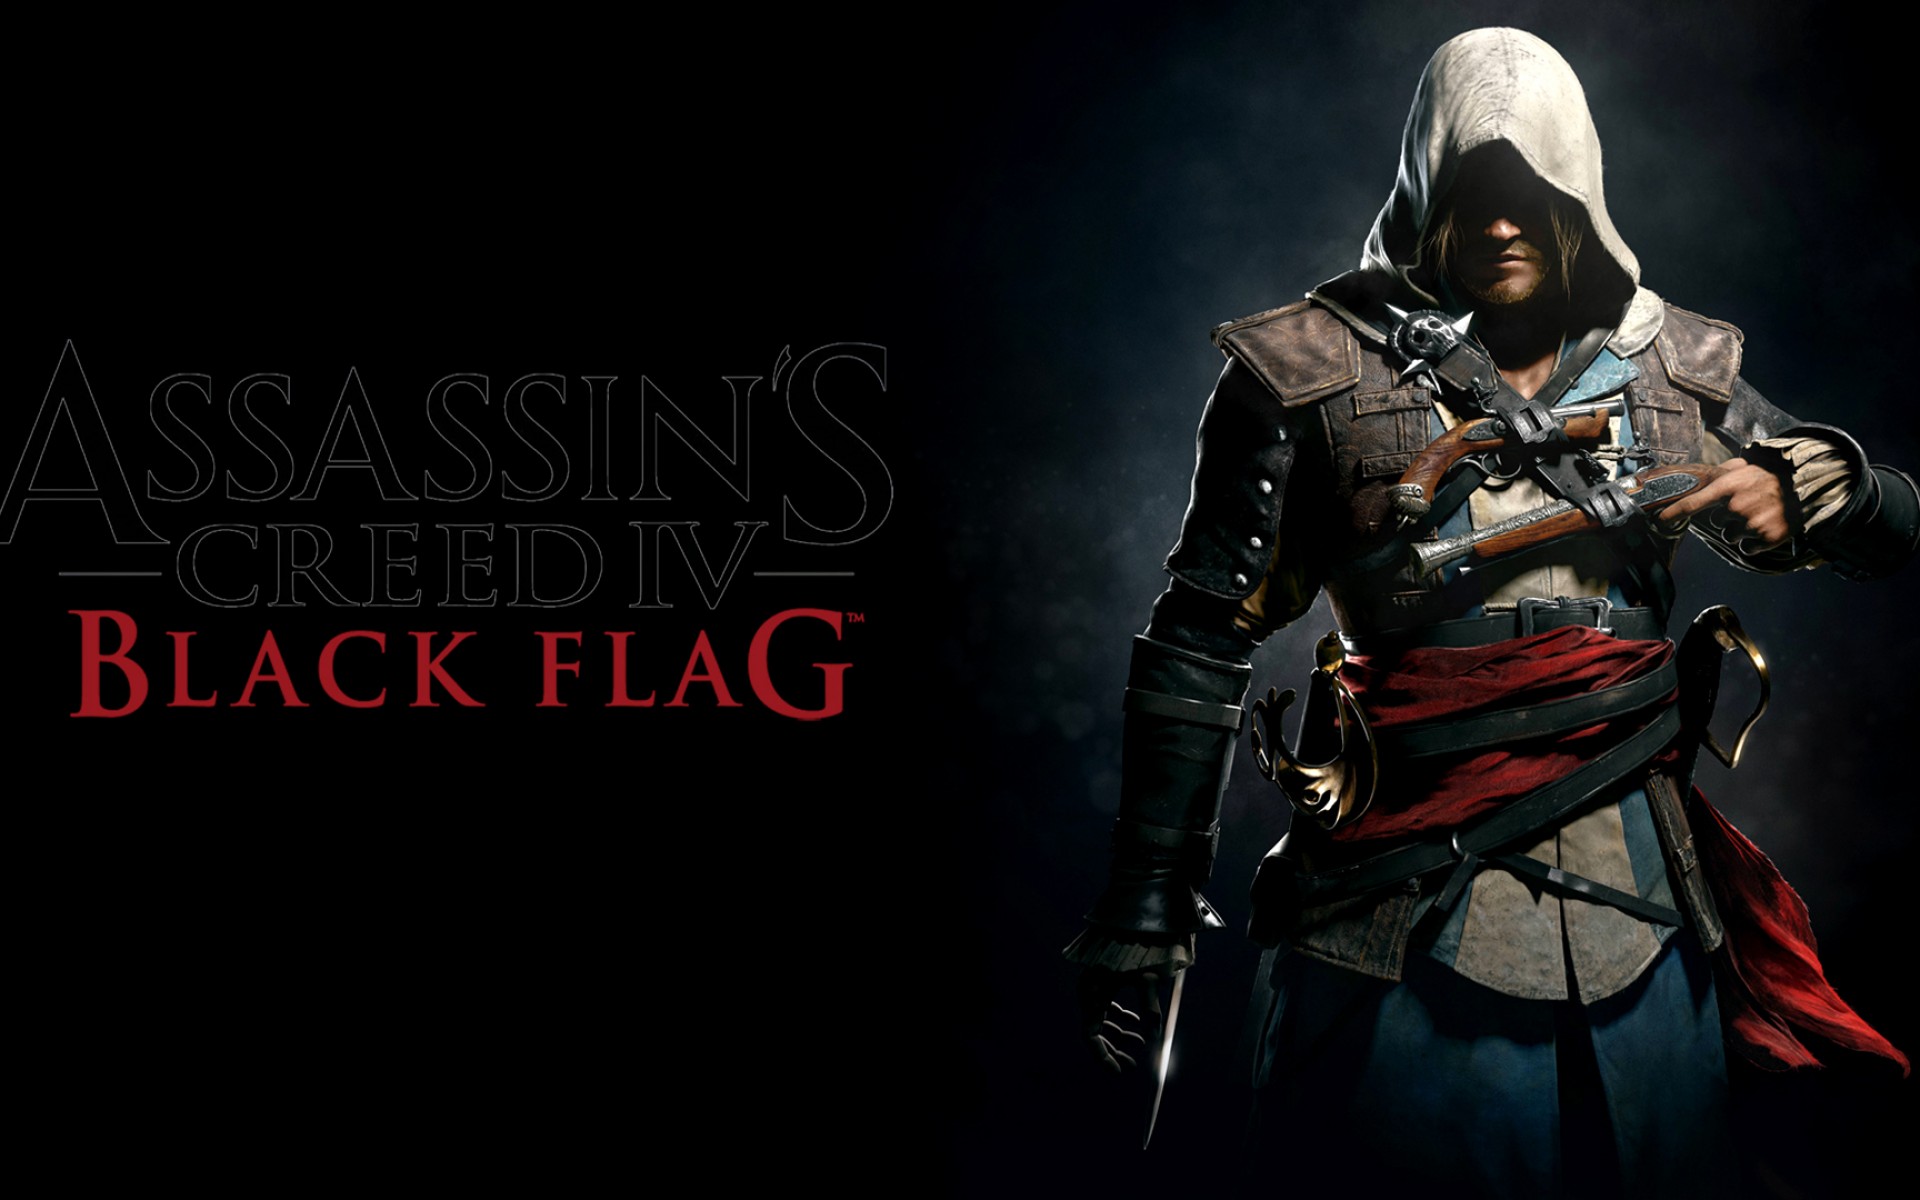 assassin's creed, video game, assassin's creed iv: black flag cell phone wallpapers